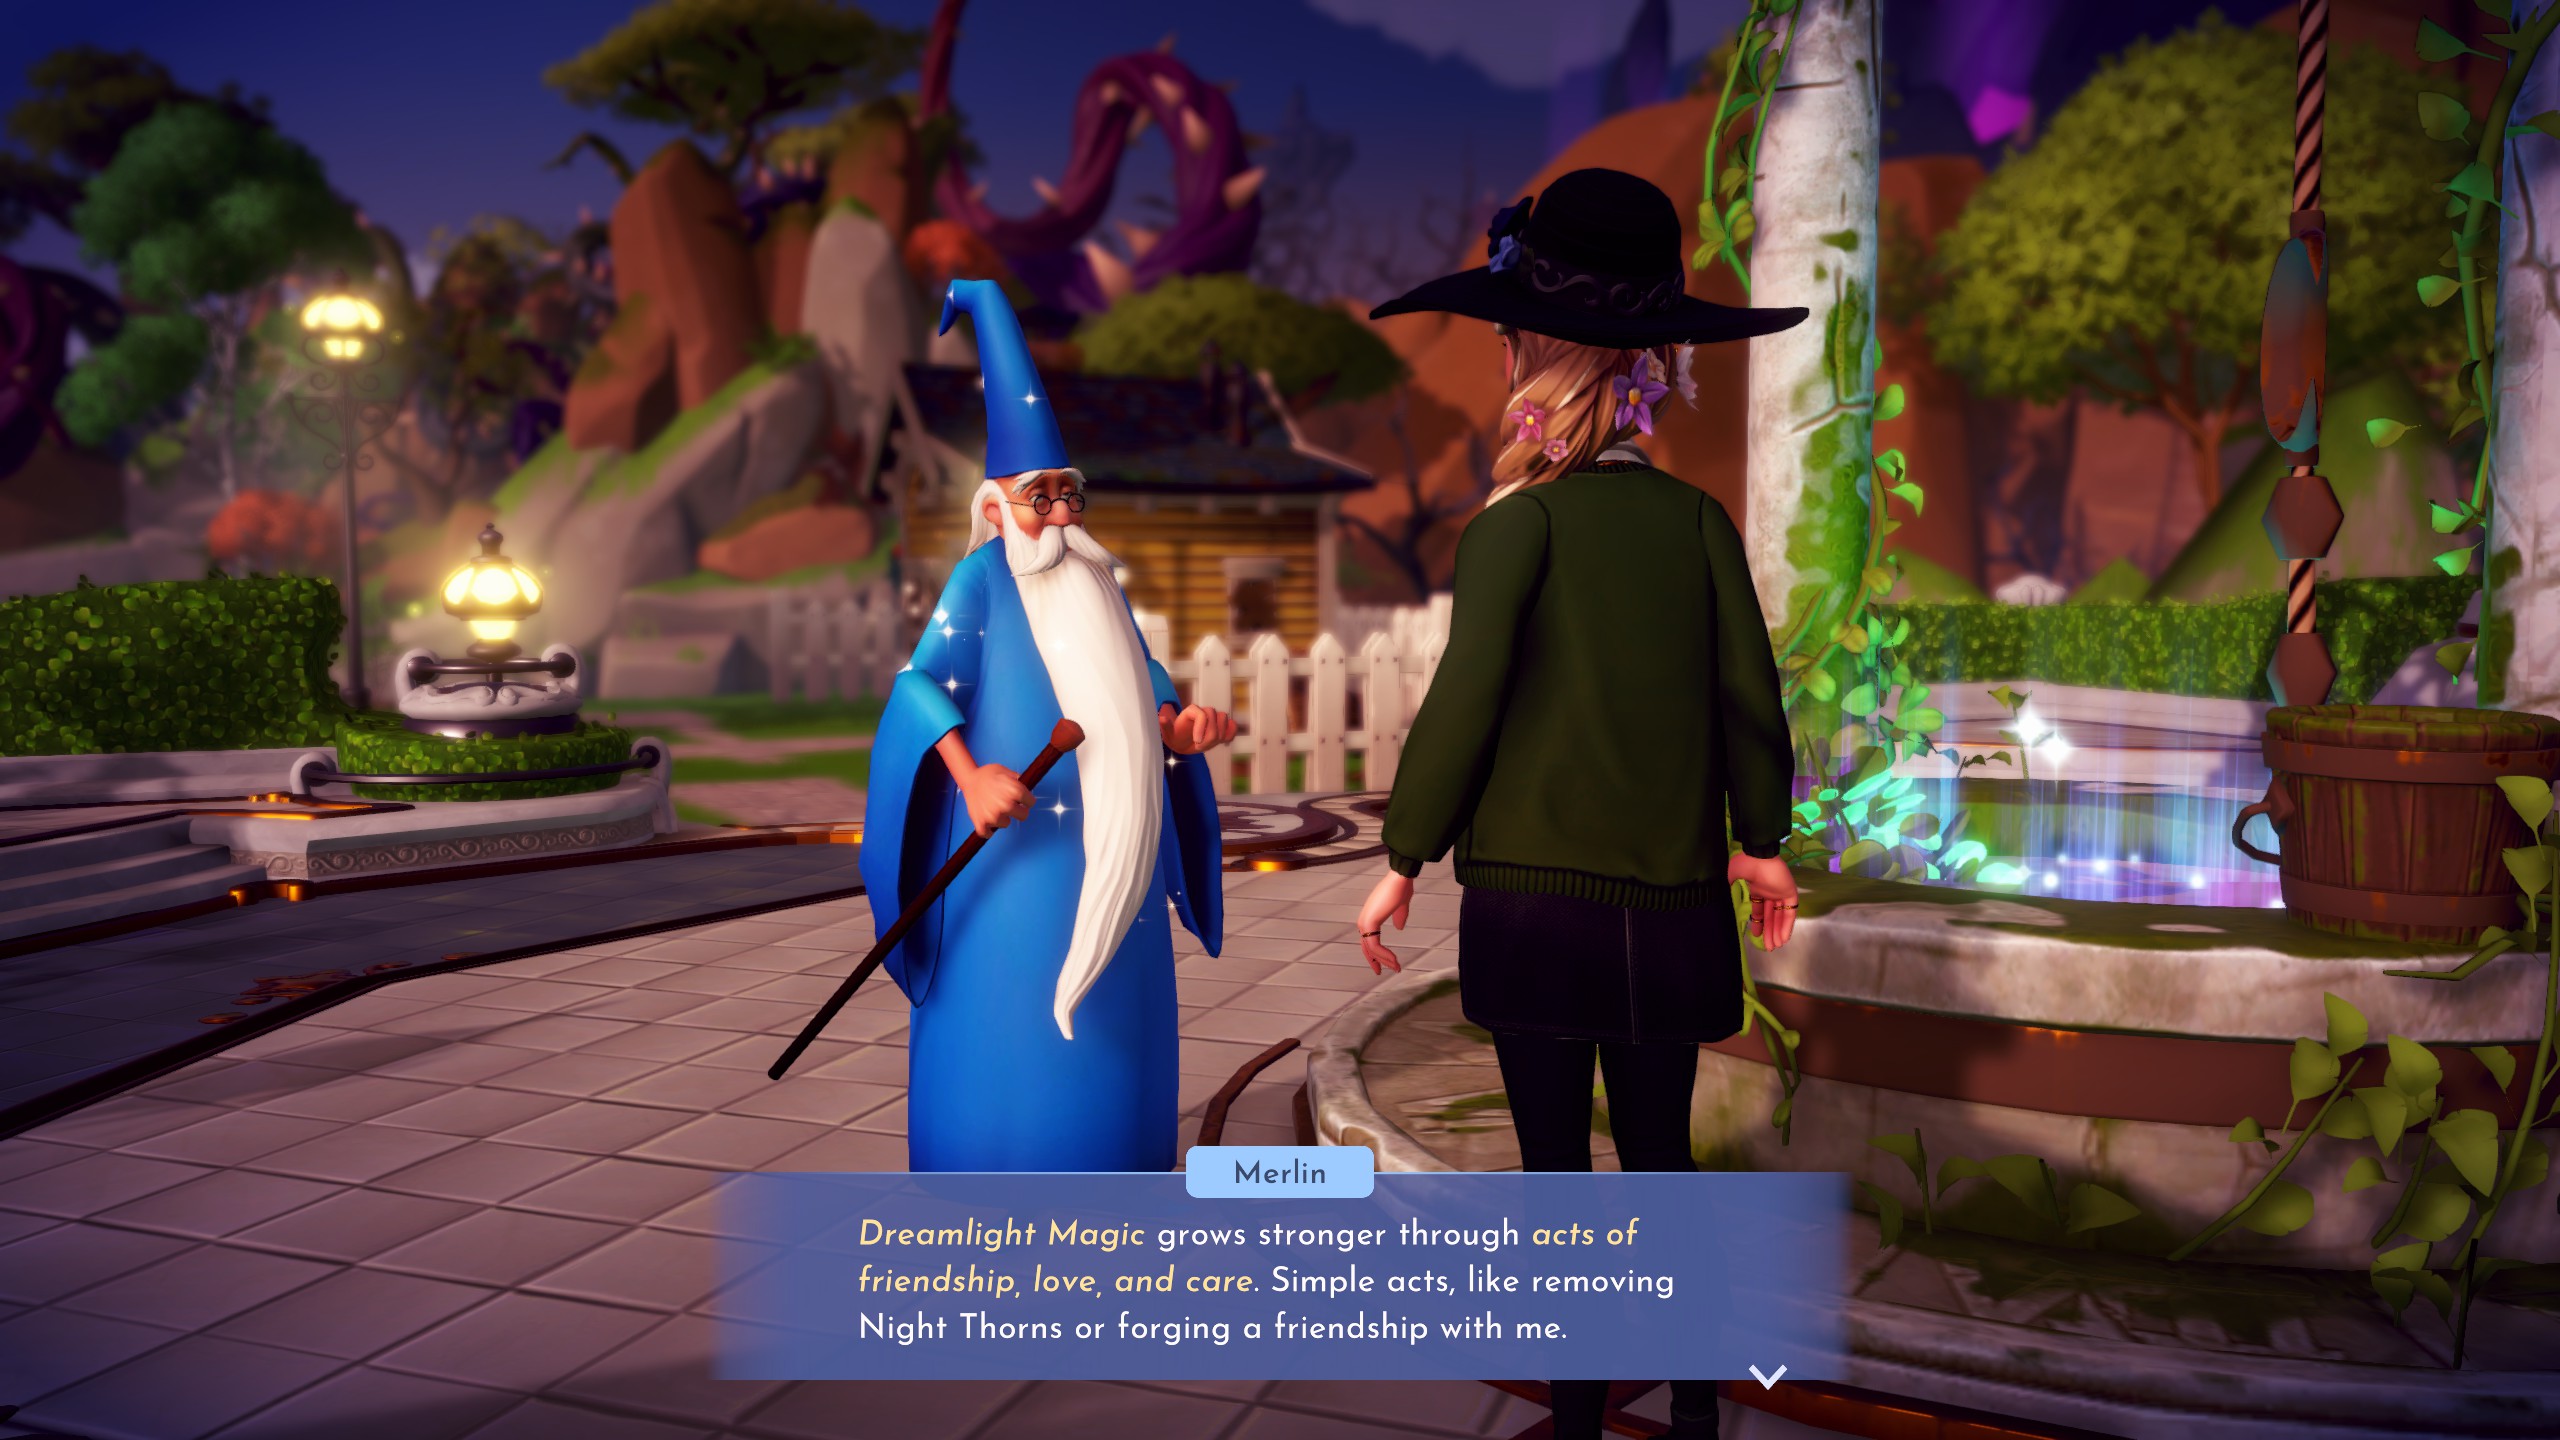 Disney Dreamlight Valley - Merlin stands near the center of Dreamlight Valley's plaza telling the player that magic grows stronger through acts of friendship, love, and care.